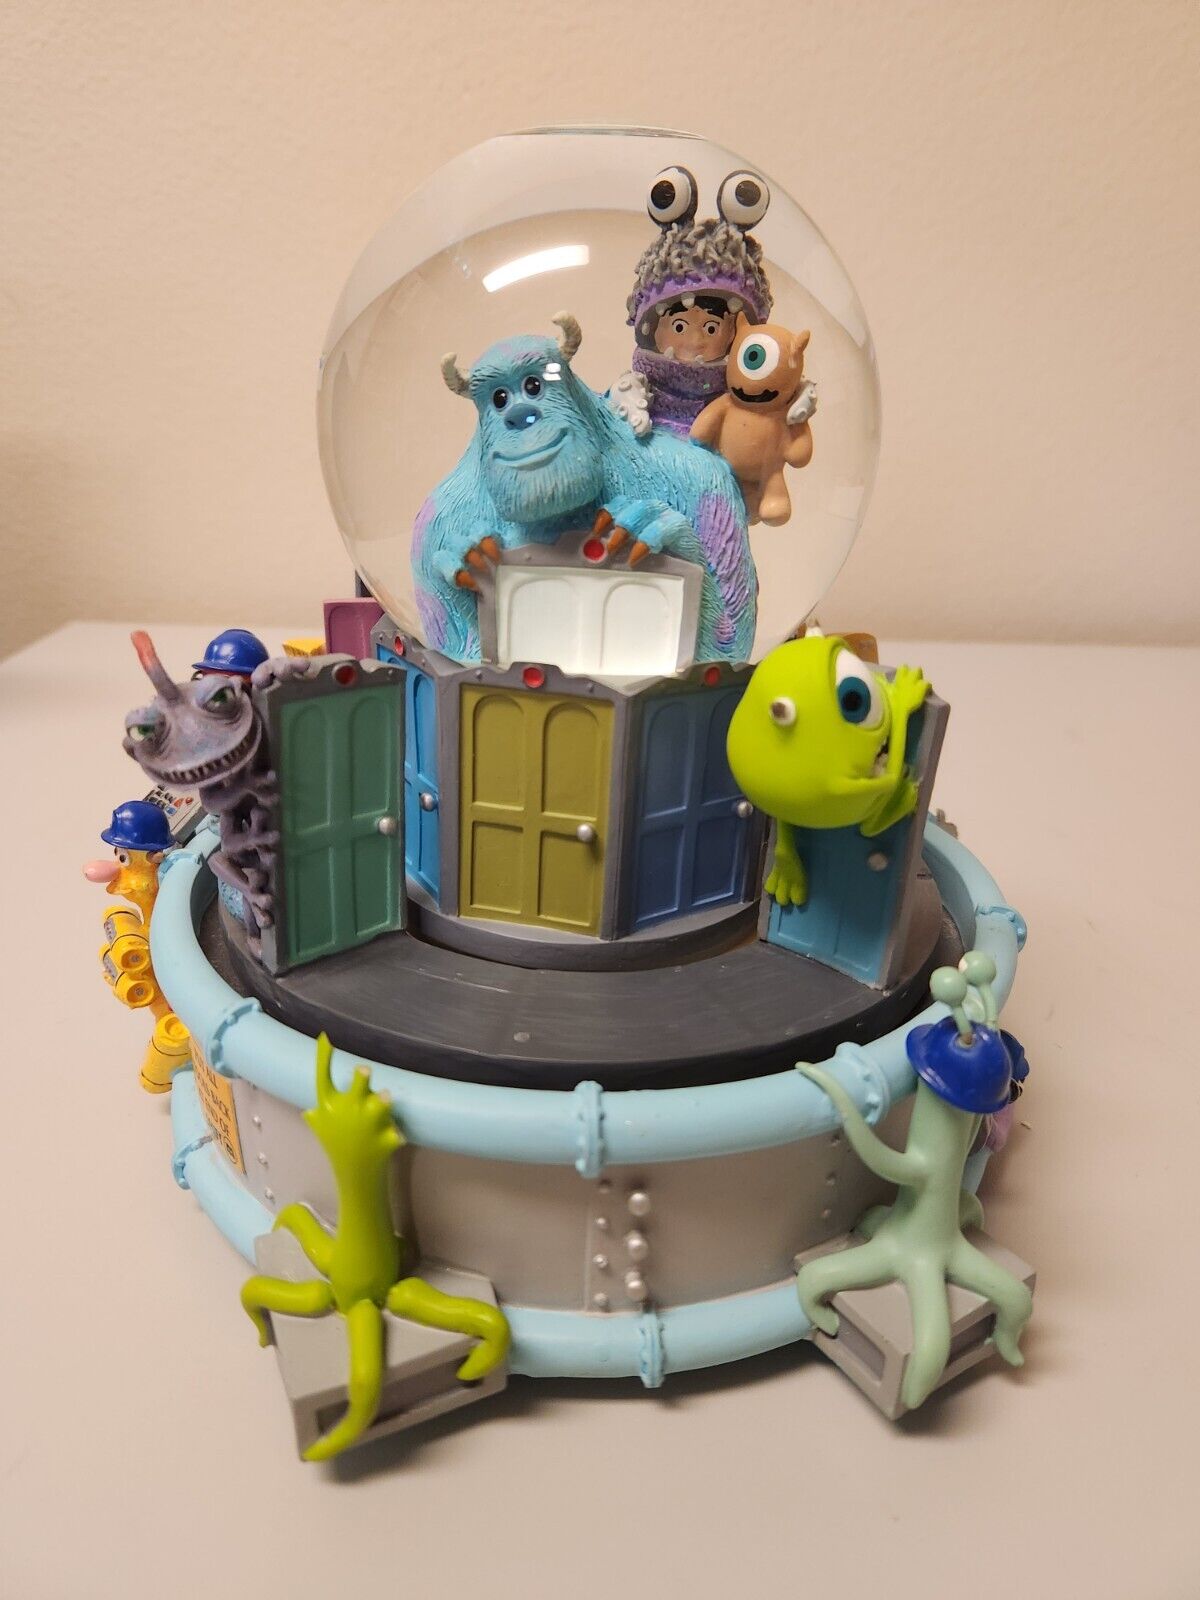 Disney Store Limited Monsters, Inc. Snow Globe Music Box - Damaged Issues *Read*